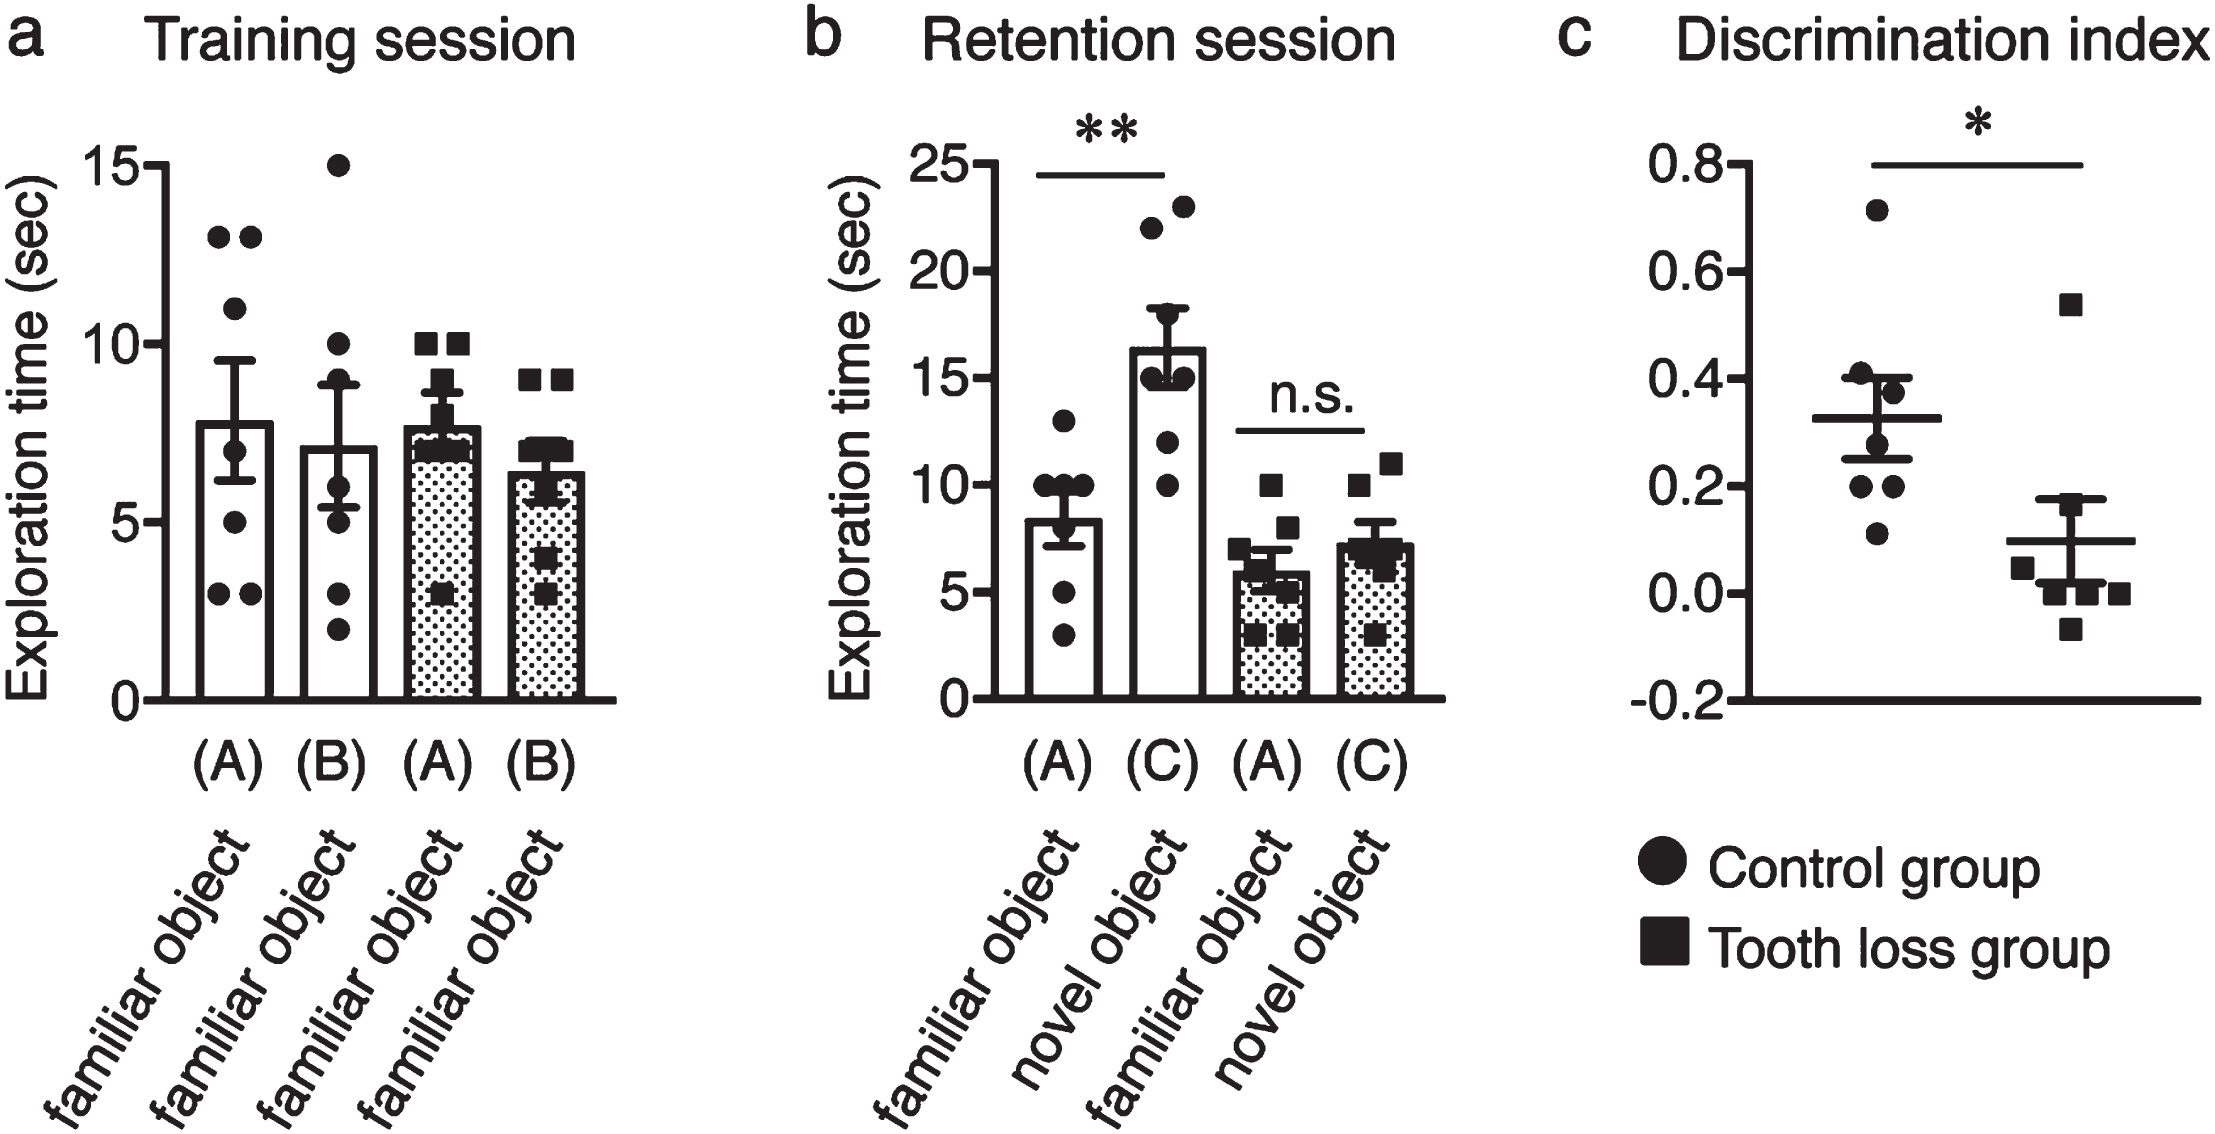 Effect of tooth loss on memory impairment in wild-type mice. a) In the training session, both control and tooth loss mice exhibited the same exploratory time between the two familiar objects (A and B). b) In the retention session, the control mice spent a longer time exploring the novel object (C) than the familiar object (A), whereas tooth loss mice spent the same amount of time exploring the familiar object (A) and the novel object (C). c) Discrimination index (DI) of the novel object recognition test. Data are represented as the mean±SD. n = 7 per group. n.s., no significant difference; *p < 0.05, **p < 0.01 versus control group, as determined using Student’s t-test.